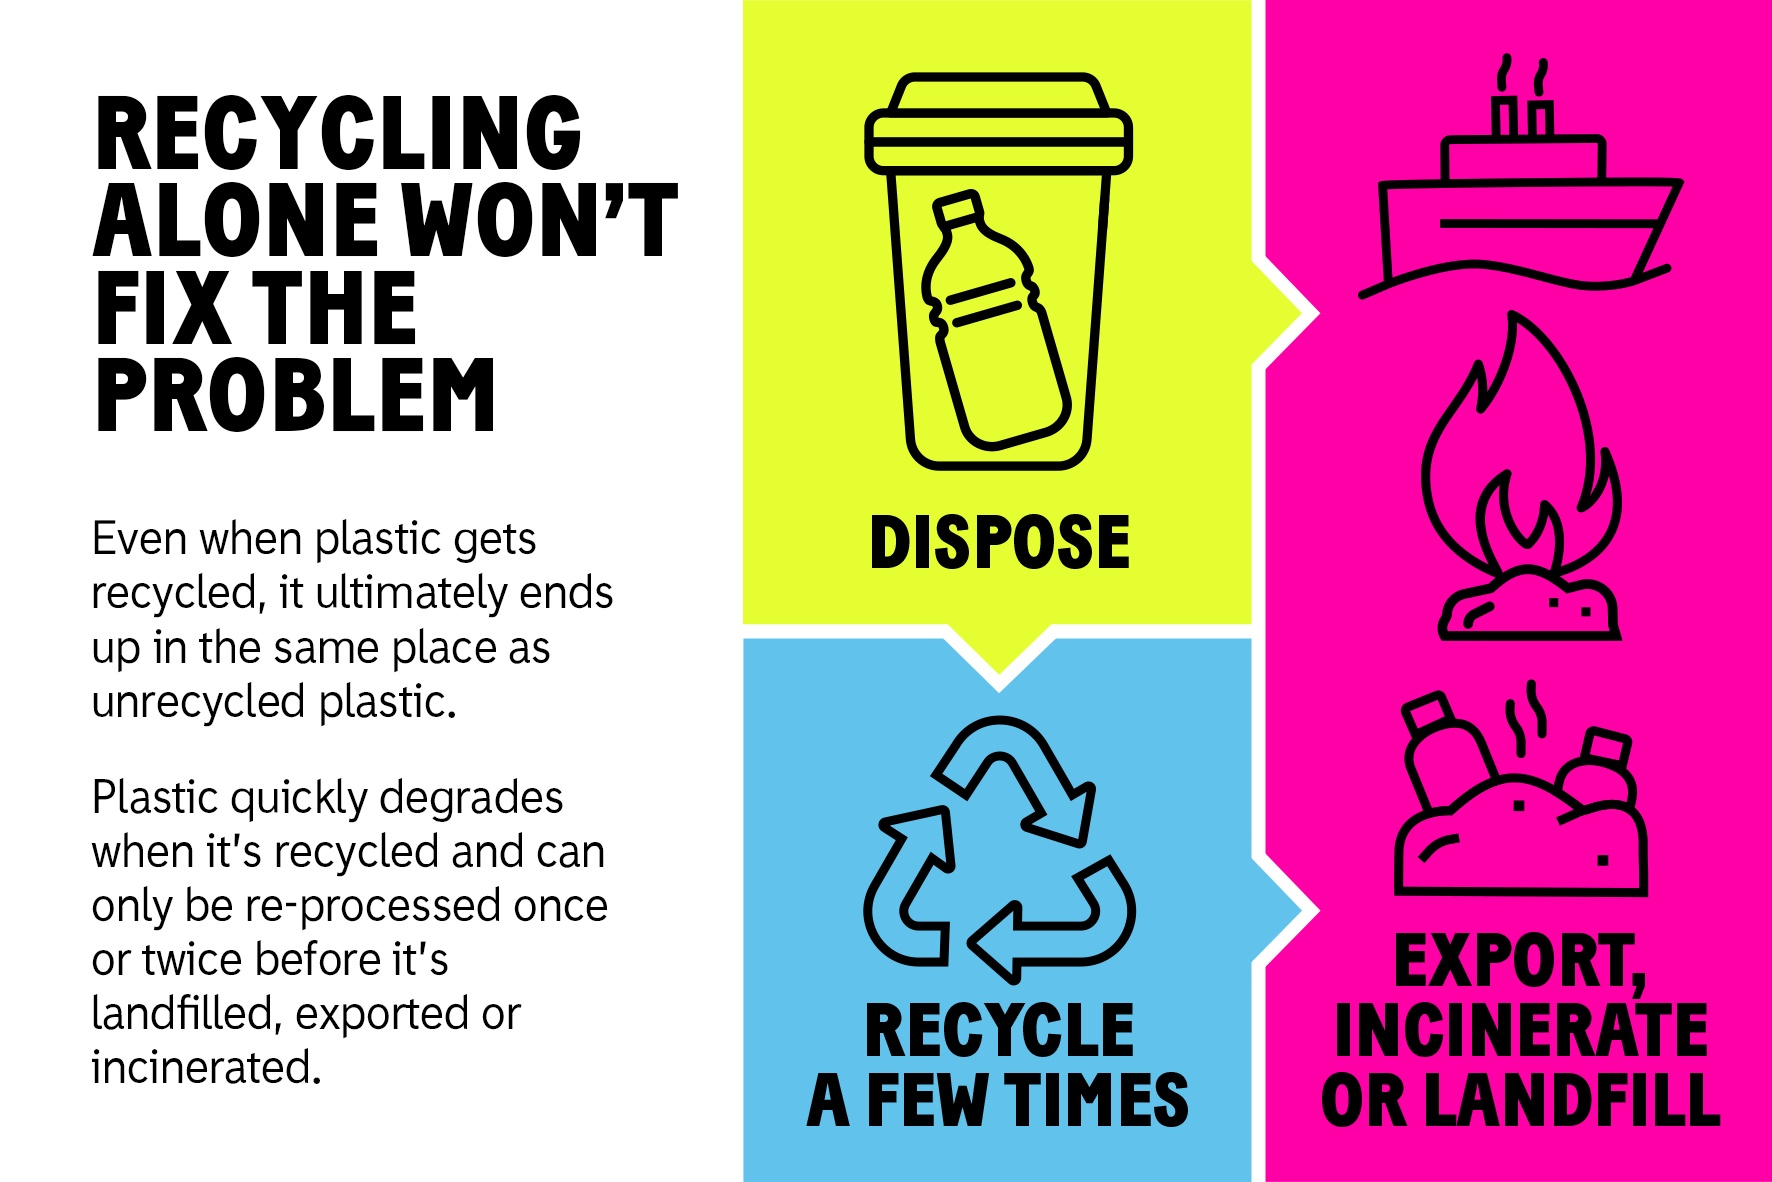 Recycling alone won't fix the problem. Even when plastic gets recycled, it ultimately ends up in the same place as unrecycled plastic.Plastic quickly degrades when its recycled and can only be re-processed once or twice before it's landfilled, exported or incinerated.